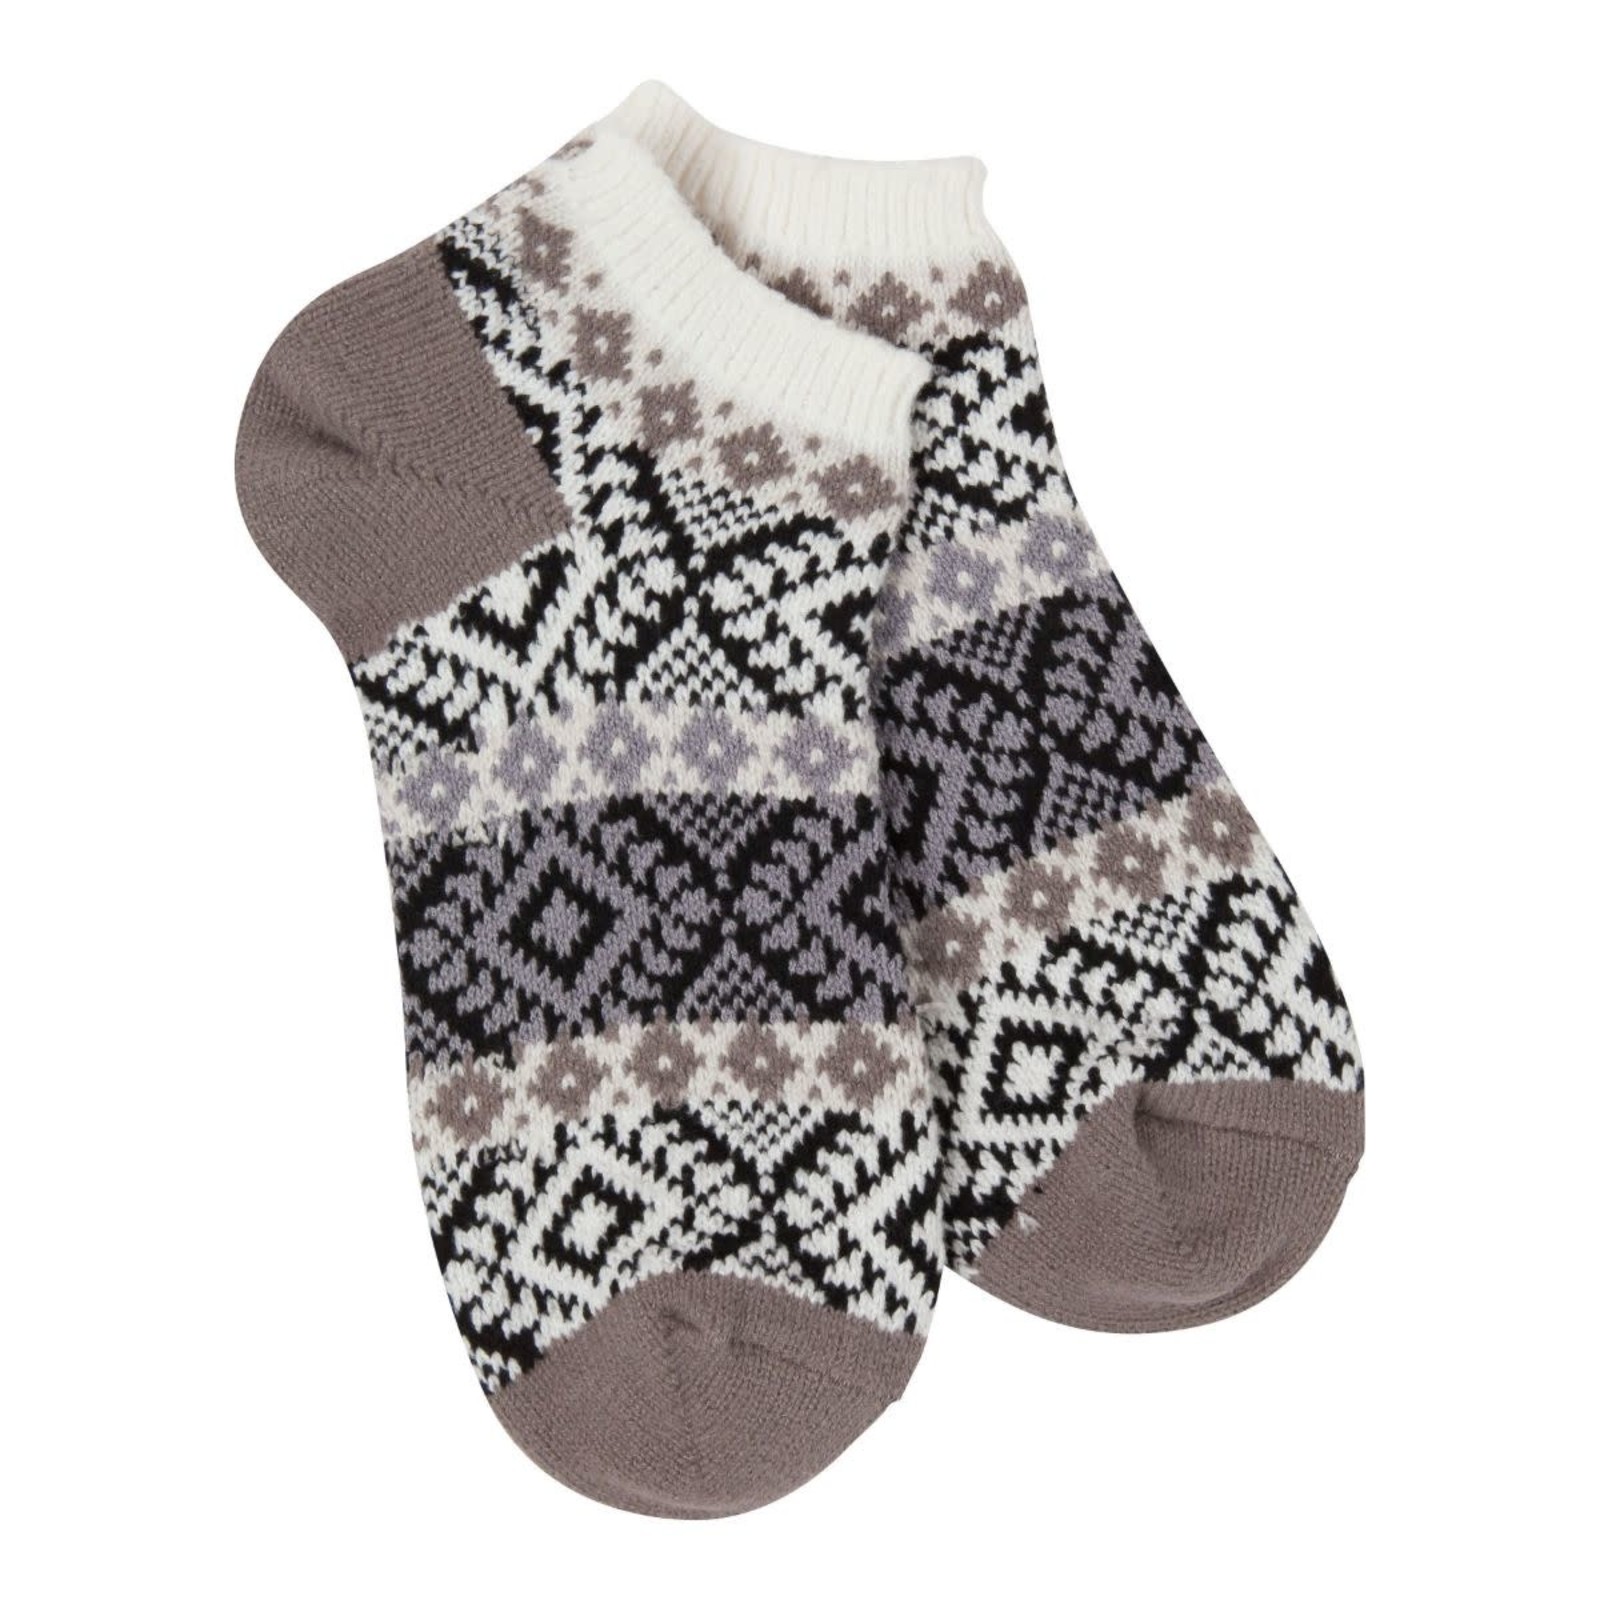 World's Softest GALLERY TEXTURED LOW Sock WSGALLO loading=